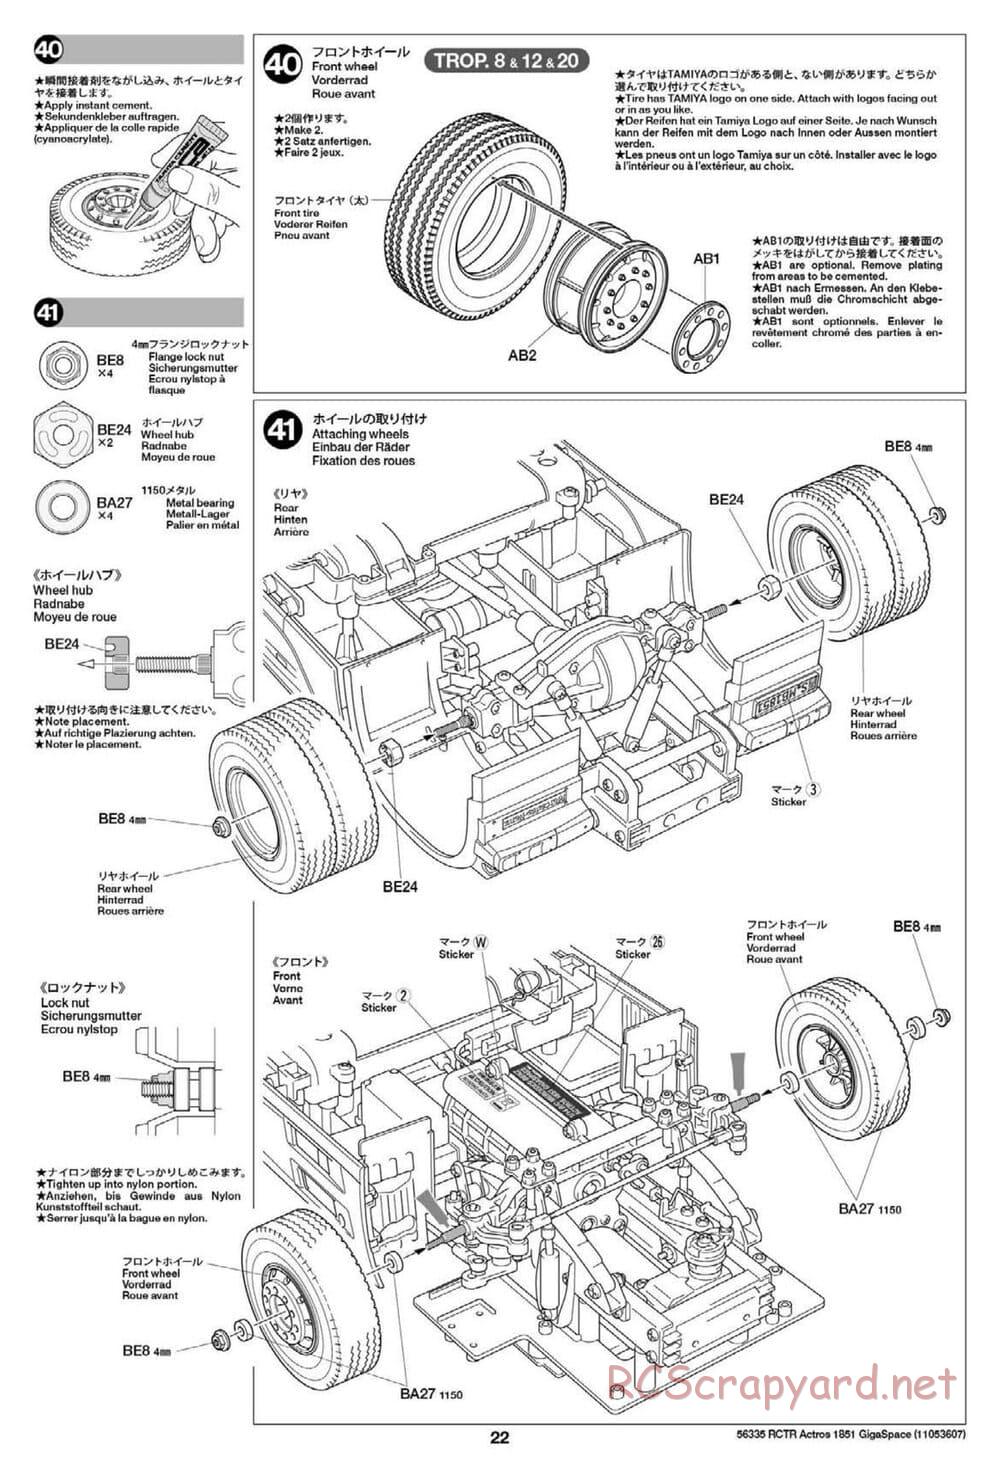 Tamiya - Mercedes-Benz Actros 1851 Gigaspace Tractor Truck Chassis - Manual - Page 22